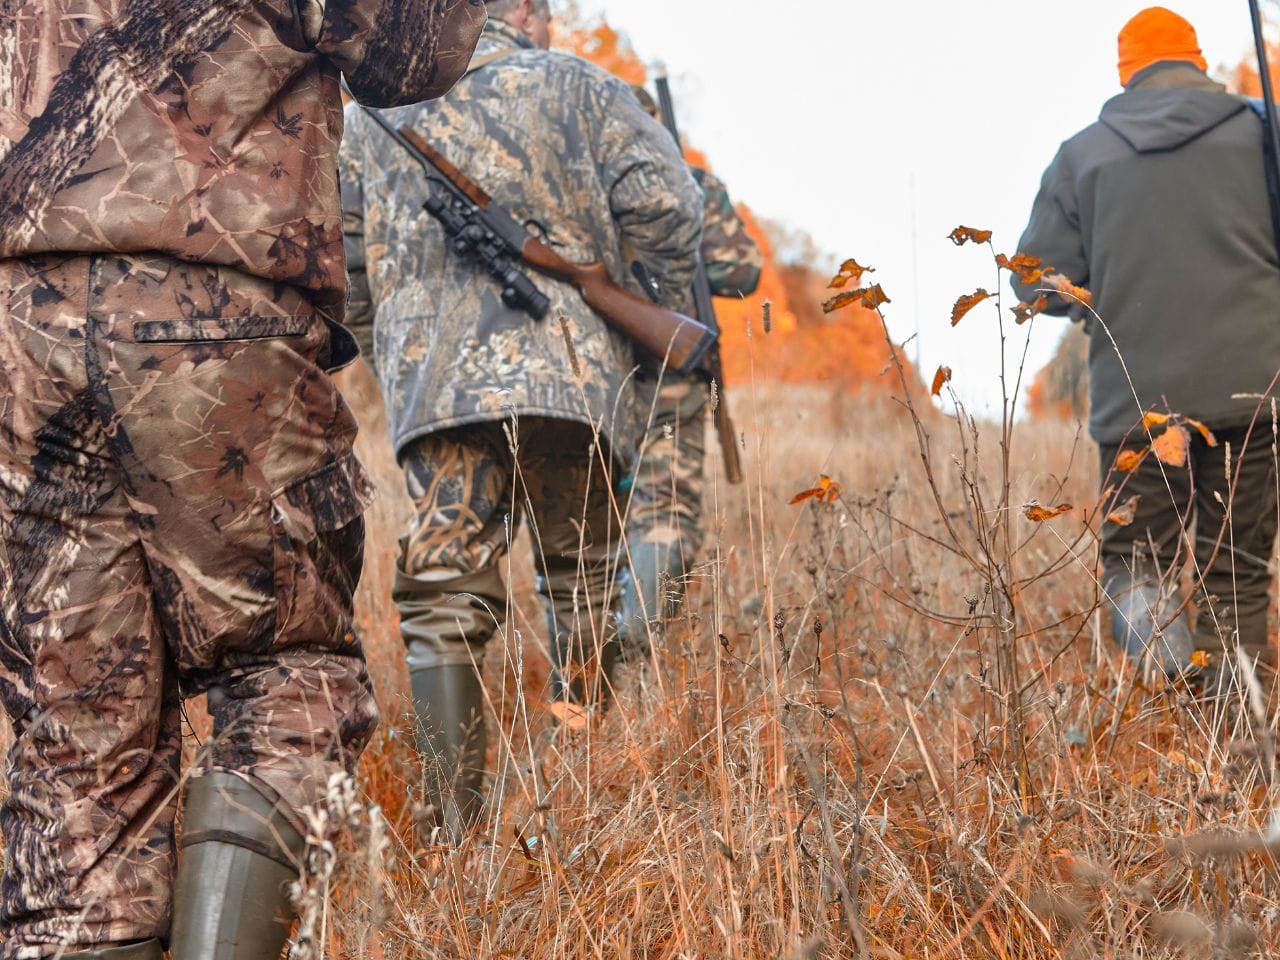 3 Benefits Hunting Has on the Environment and Economy